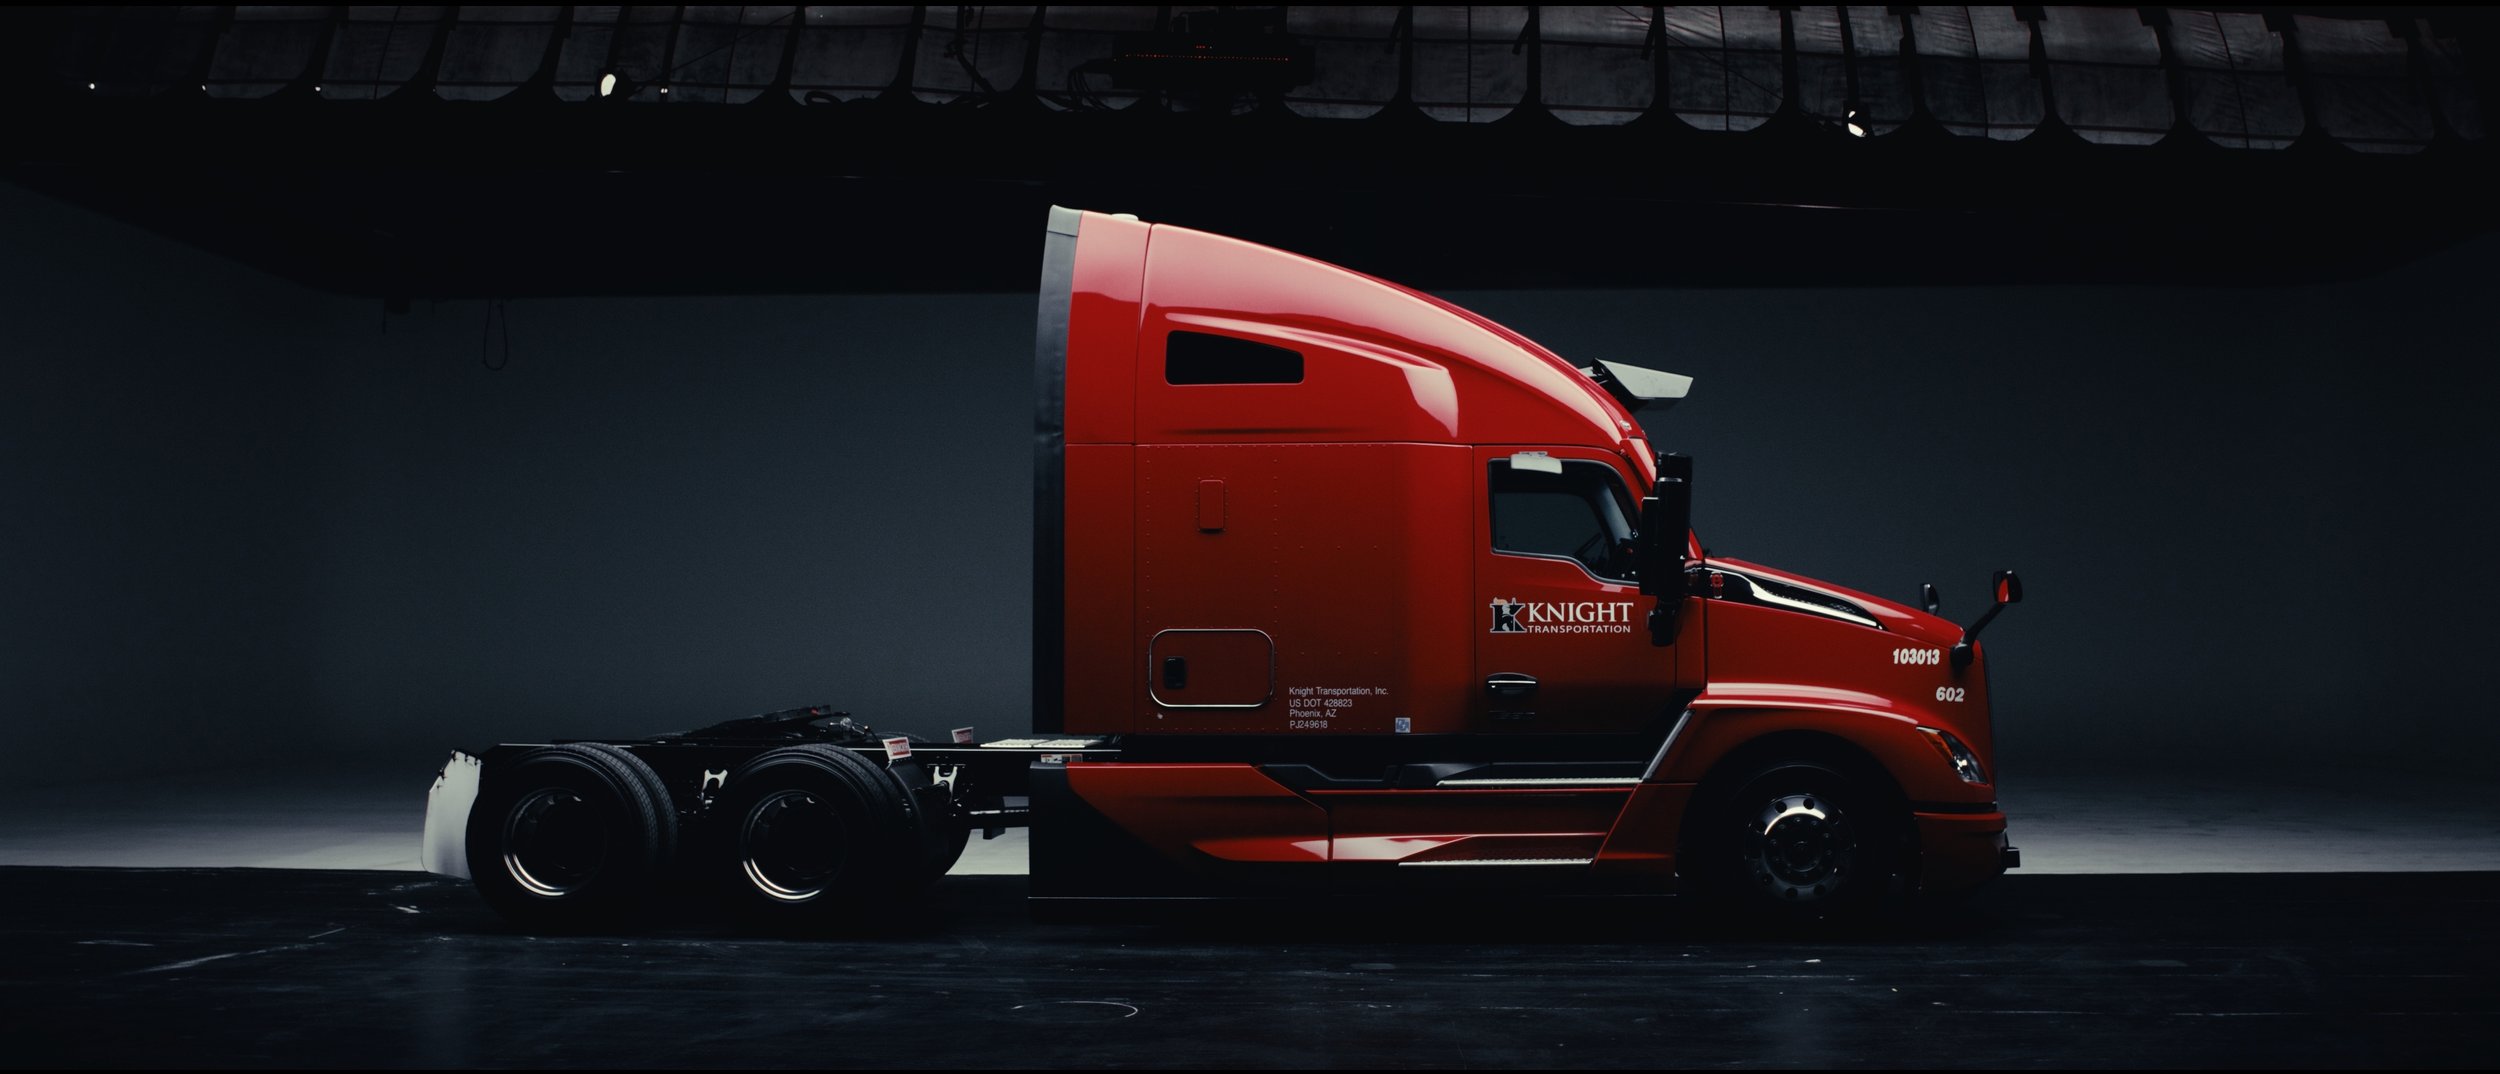  Embark Self-Driving Technology for on-the-road driving with carrier Knight Logistics 